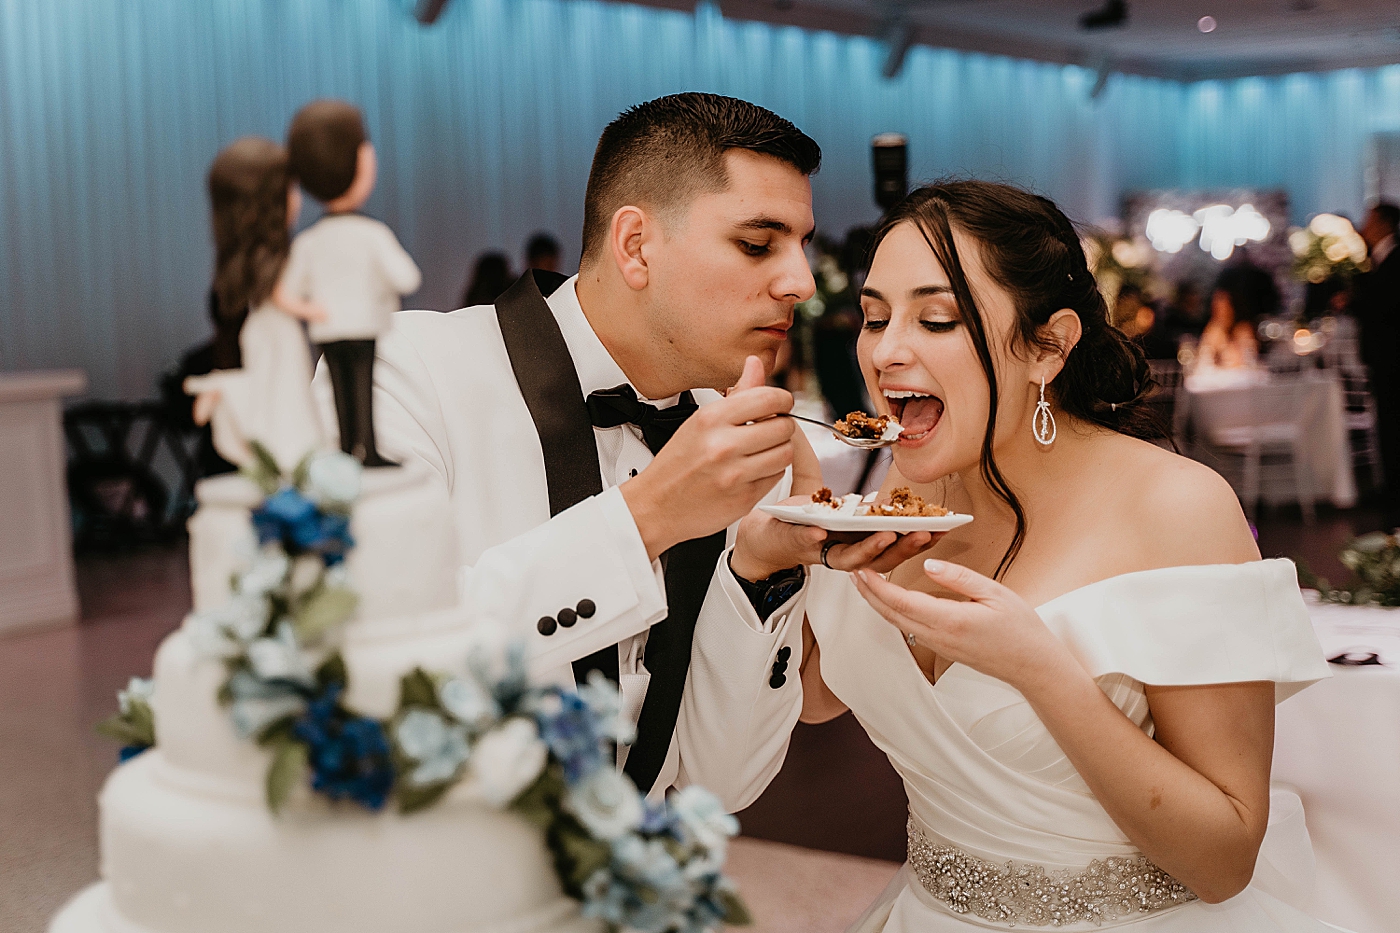 Groom giving Bride a bite of cake Lavan Venue Wedding Photography captured by South Florida Wedding Photographer Krystal Capone Photography